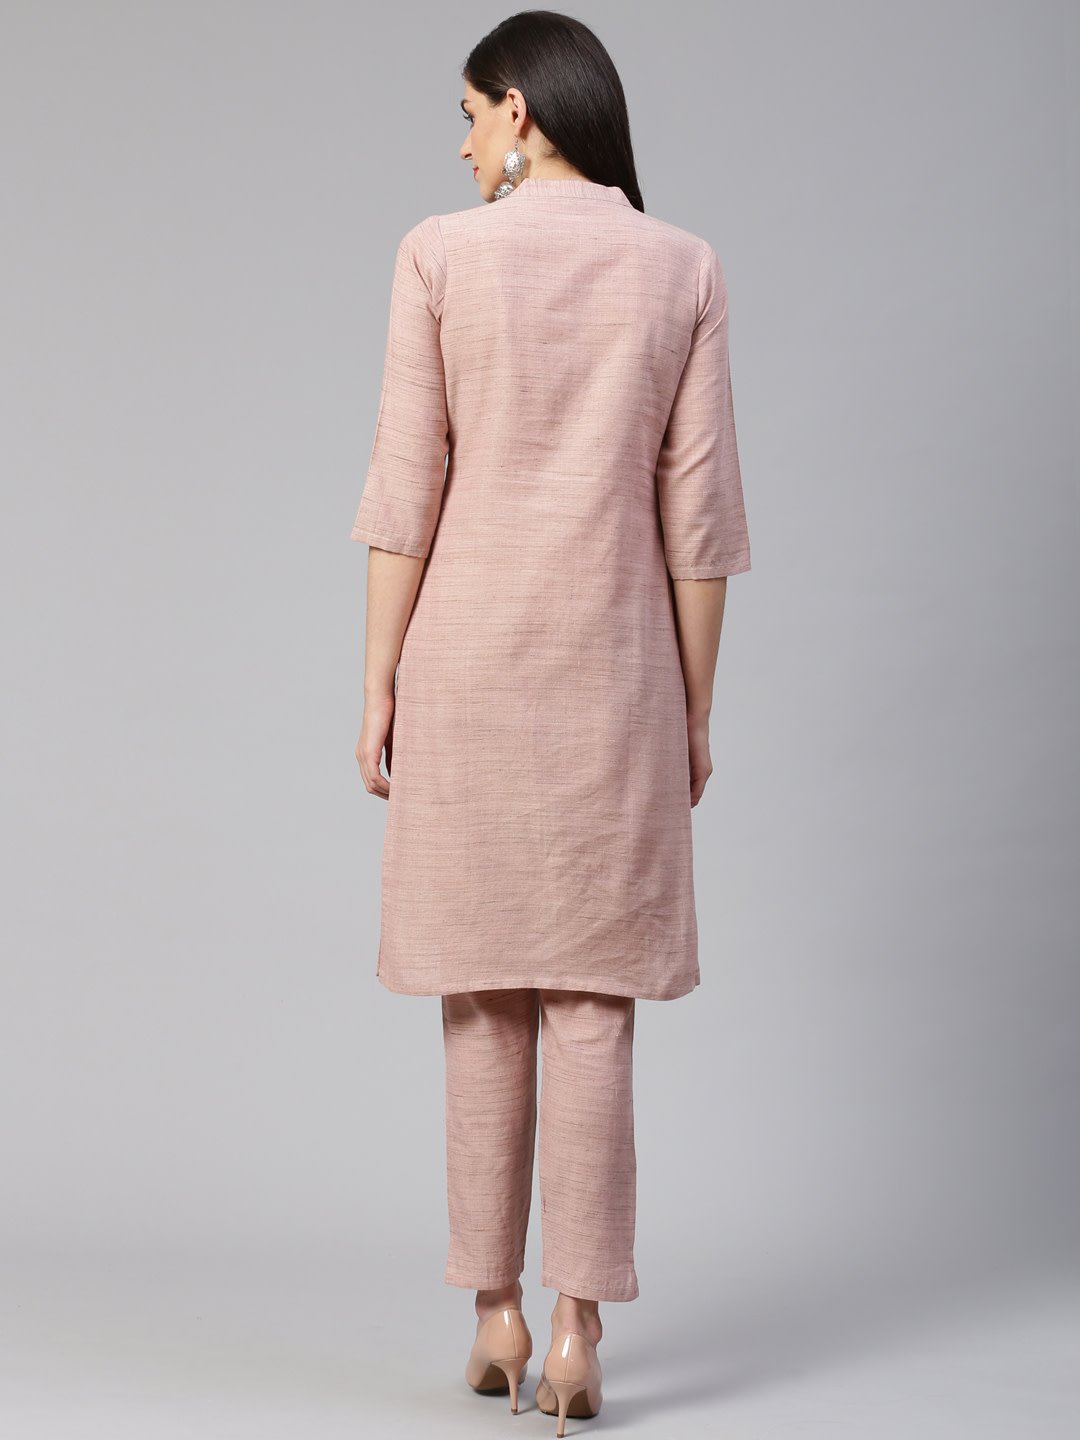 Women's Pink Woven Design Kurta with Trousers - Jompers